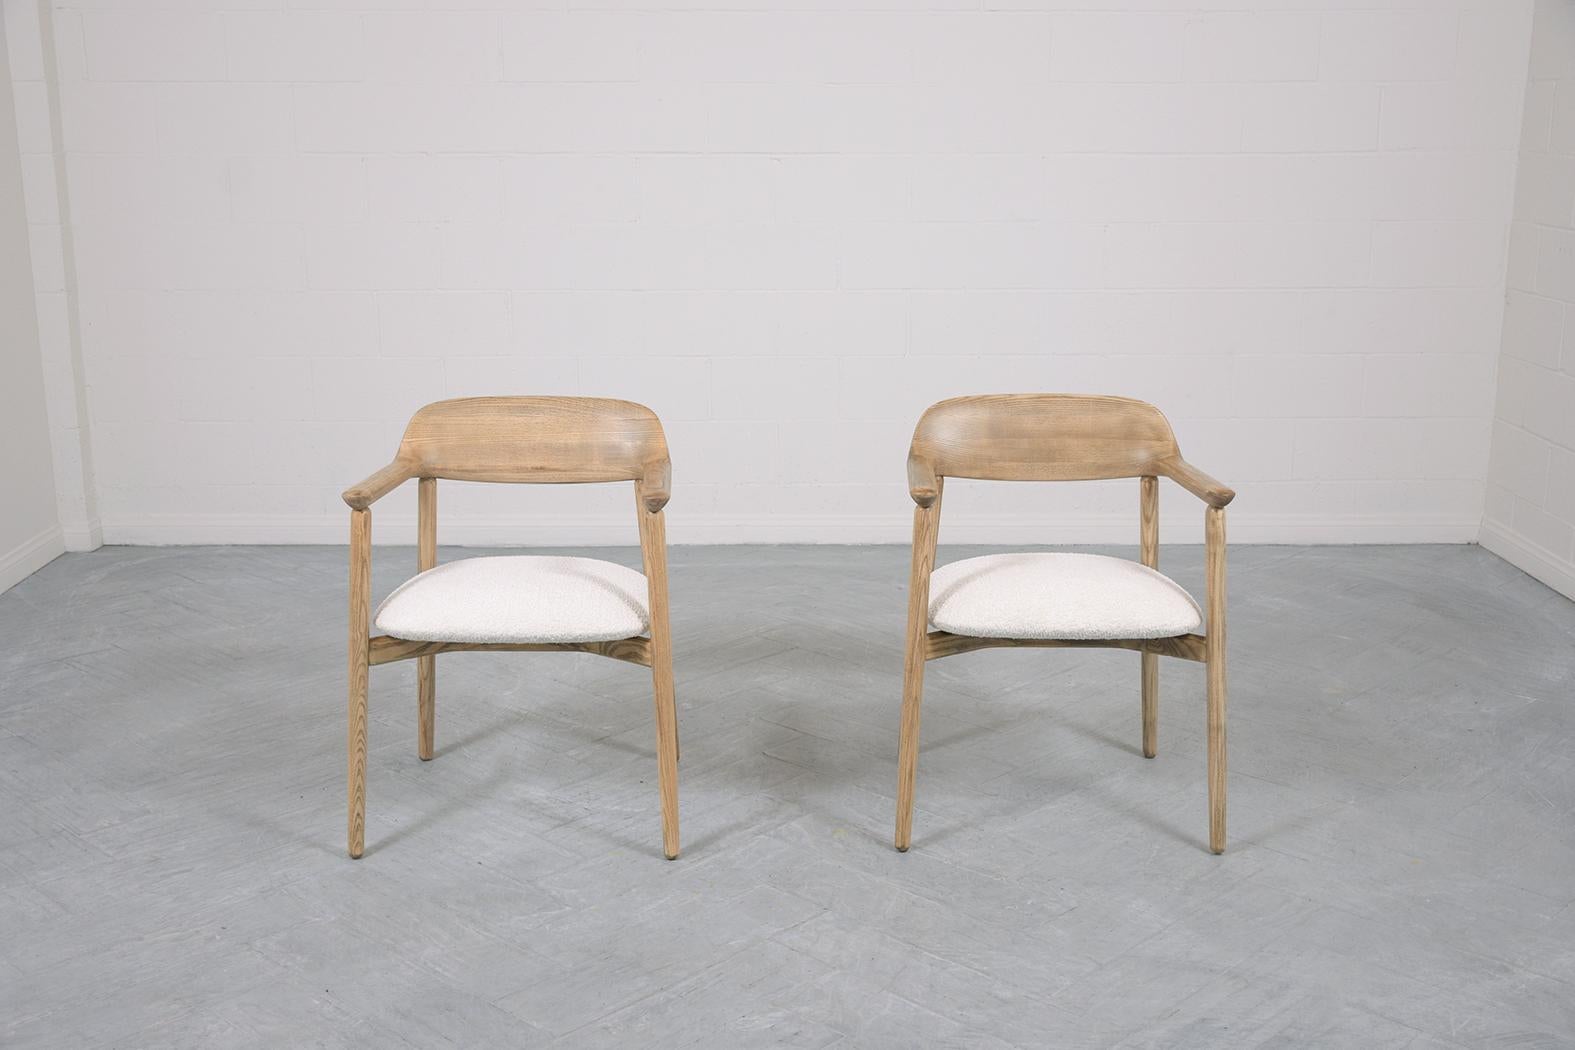 Modern Restored 1990s Mid-Century Boucle Armchairs: White Upholstered with Beech Finish For Sale